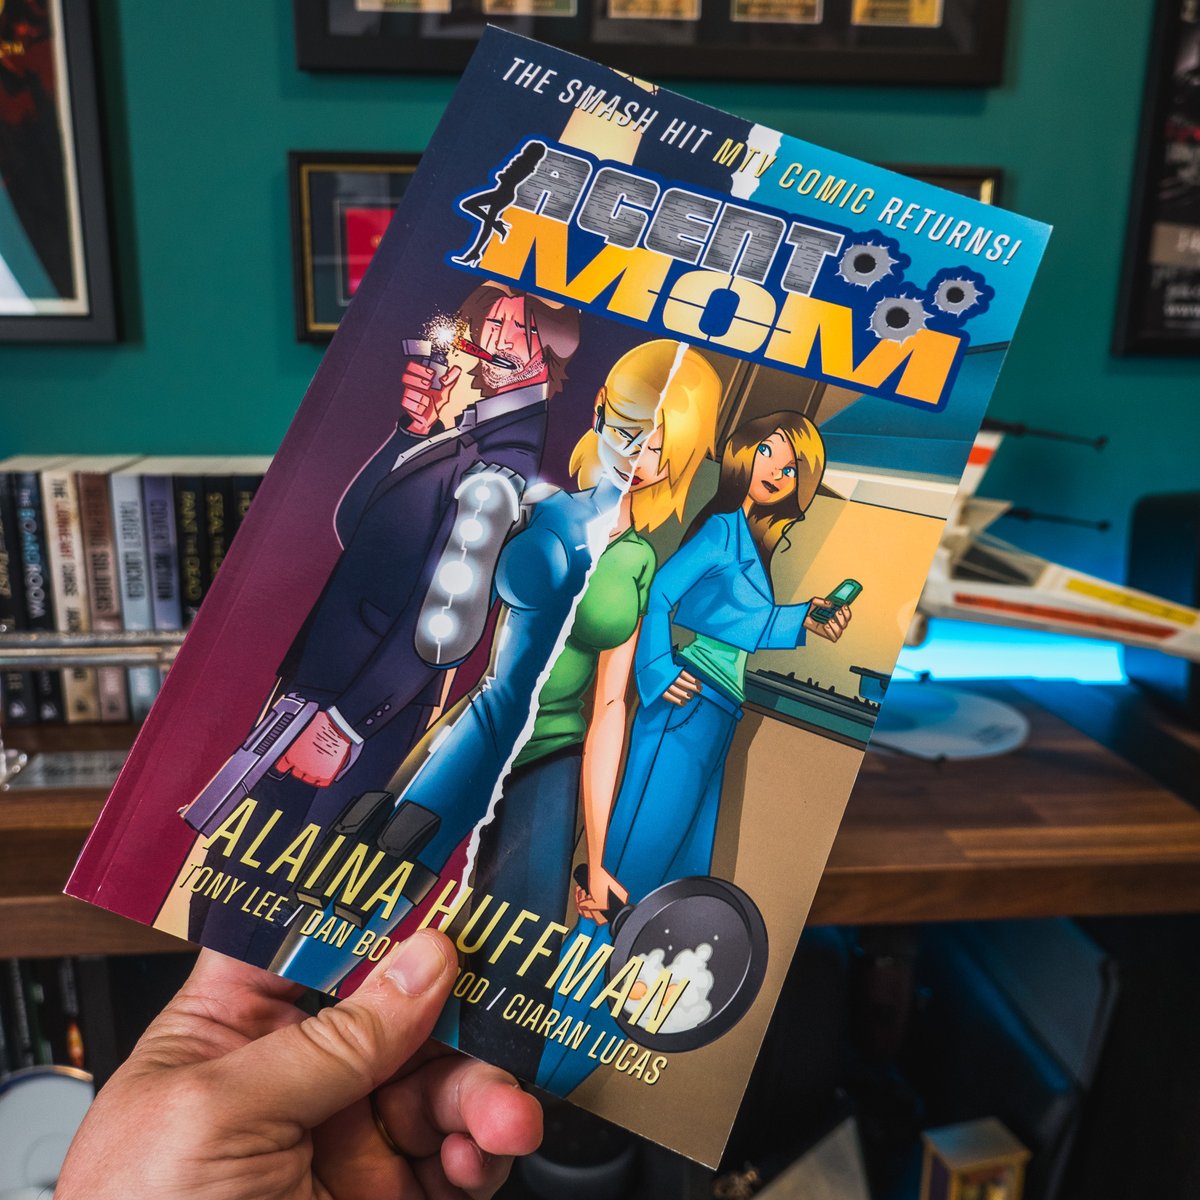 Well the proof of #AGENTMOM from @CaliburnComics arrived today, and it looks great! Expect it out by the end of the month! @AlainaHuffman